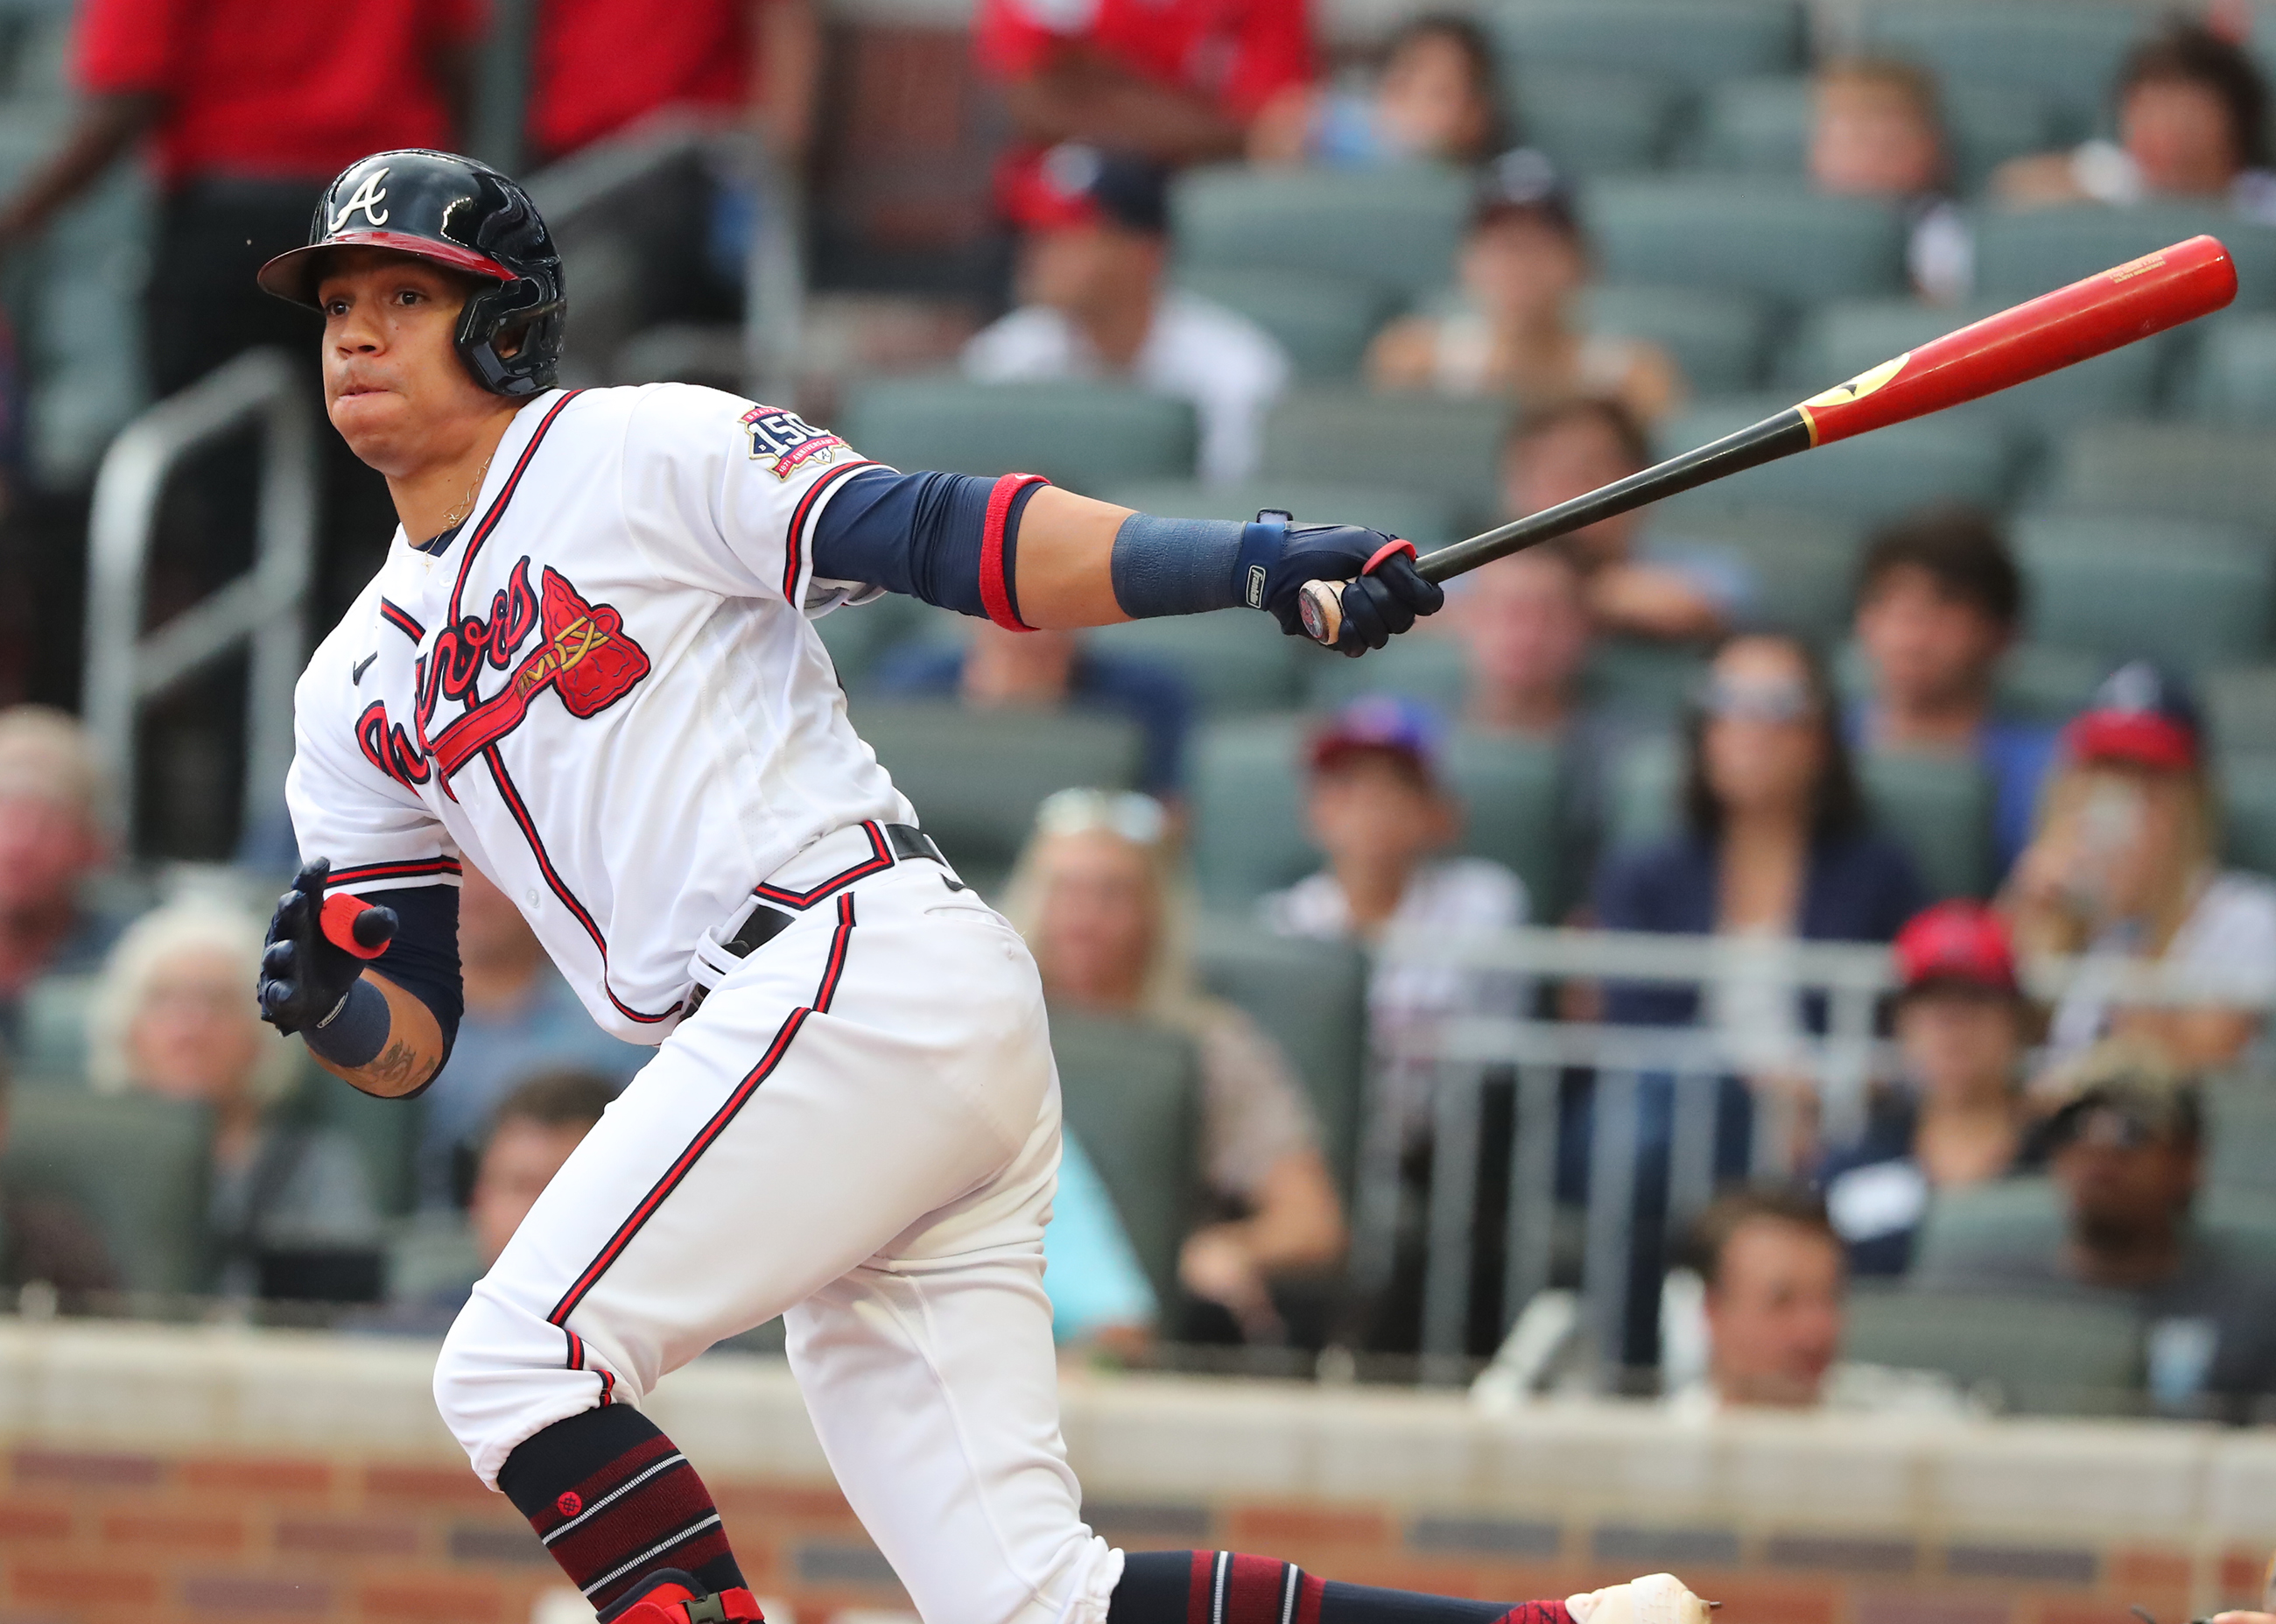 Johan Camargo replaces Ehire Adrianza on Braves' World Series roster